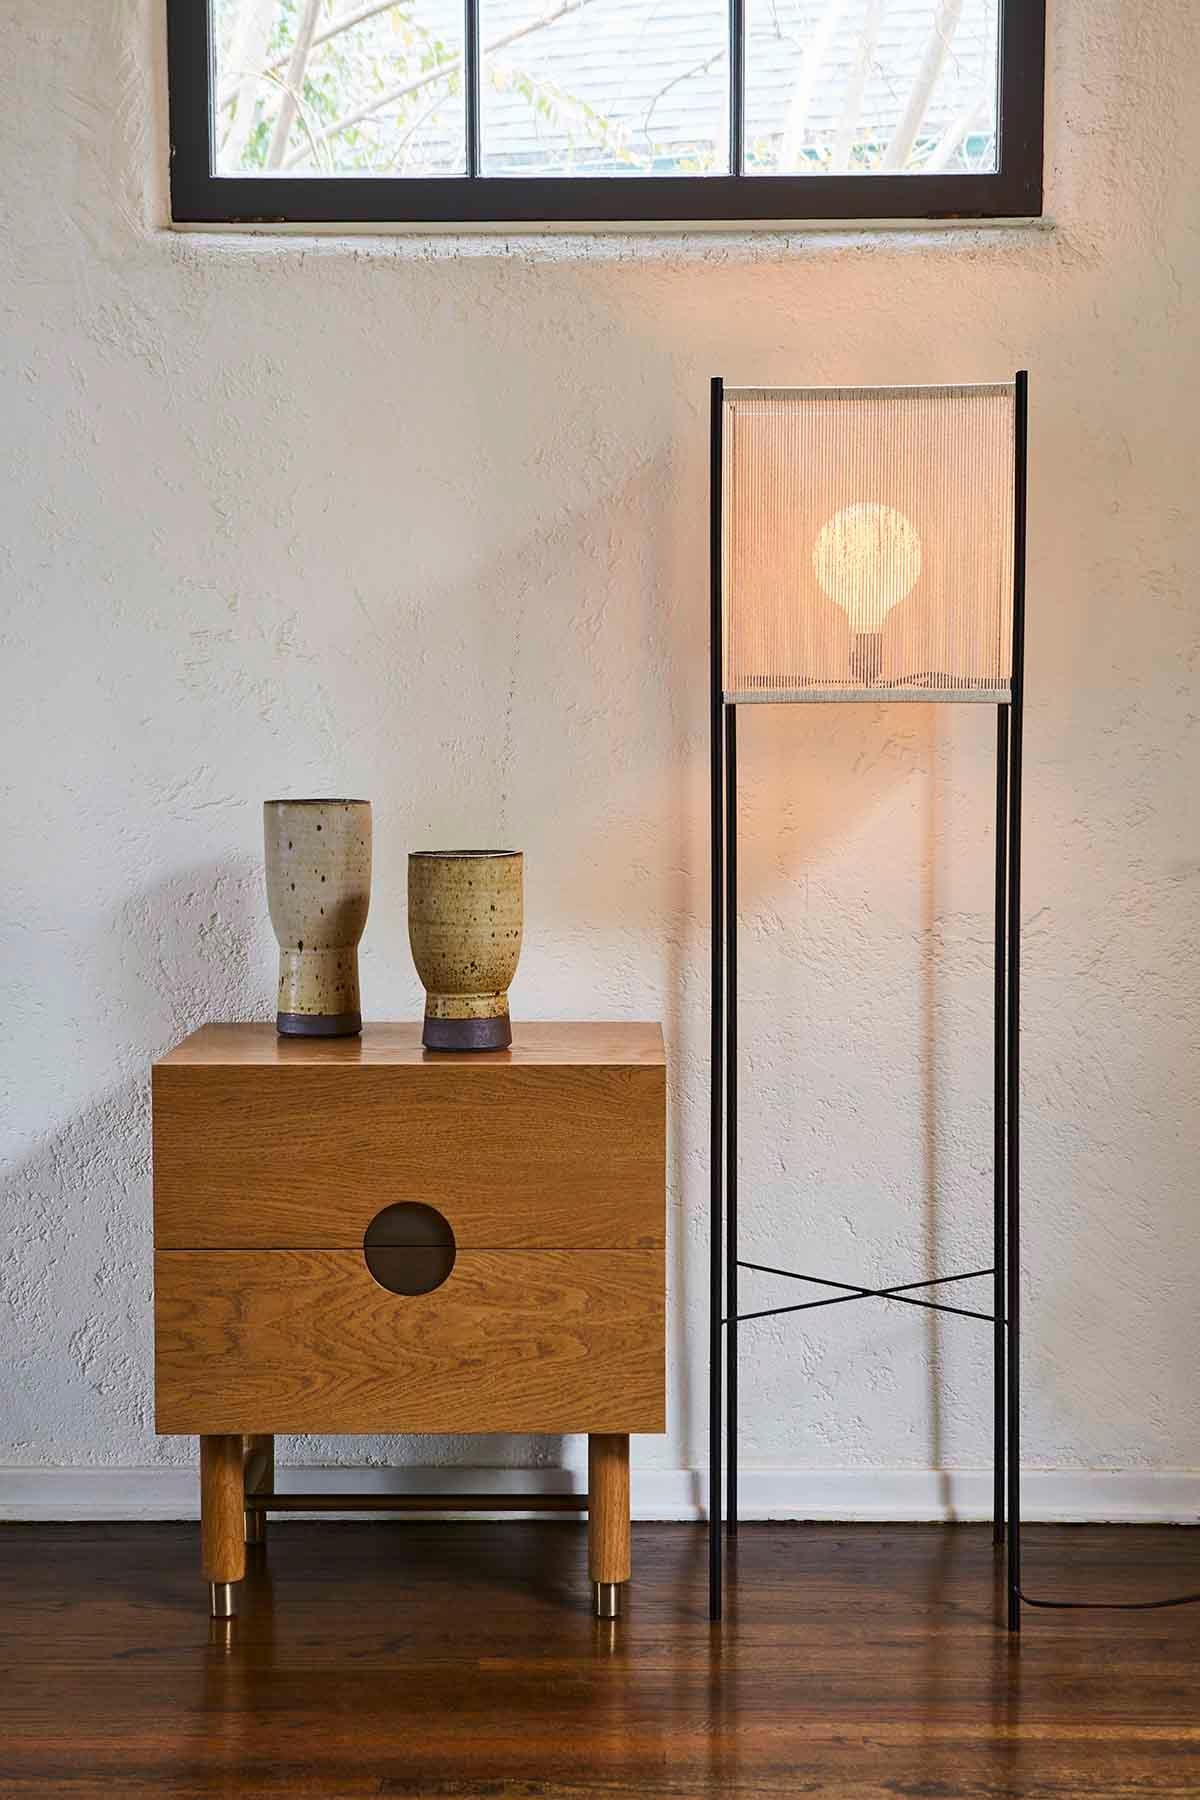 The Topanga floor lamp features a white cotton rope shade and iron frame. Includes a foot petal switch.

The Lawson-Fenning Collection is designed and handmade in Los Angeles, California. Reach out to discover what options are currently in stock.